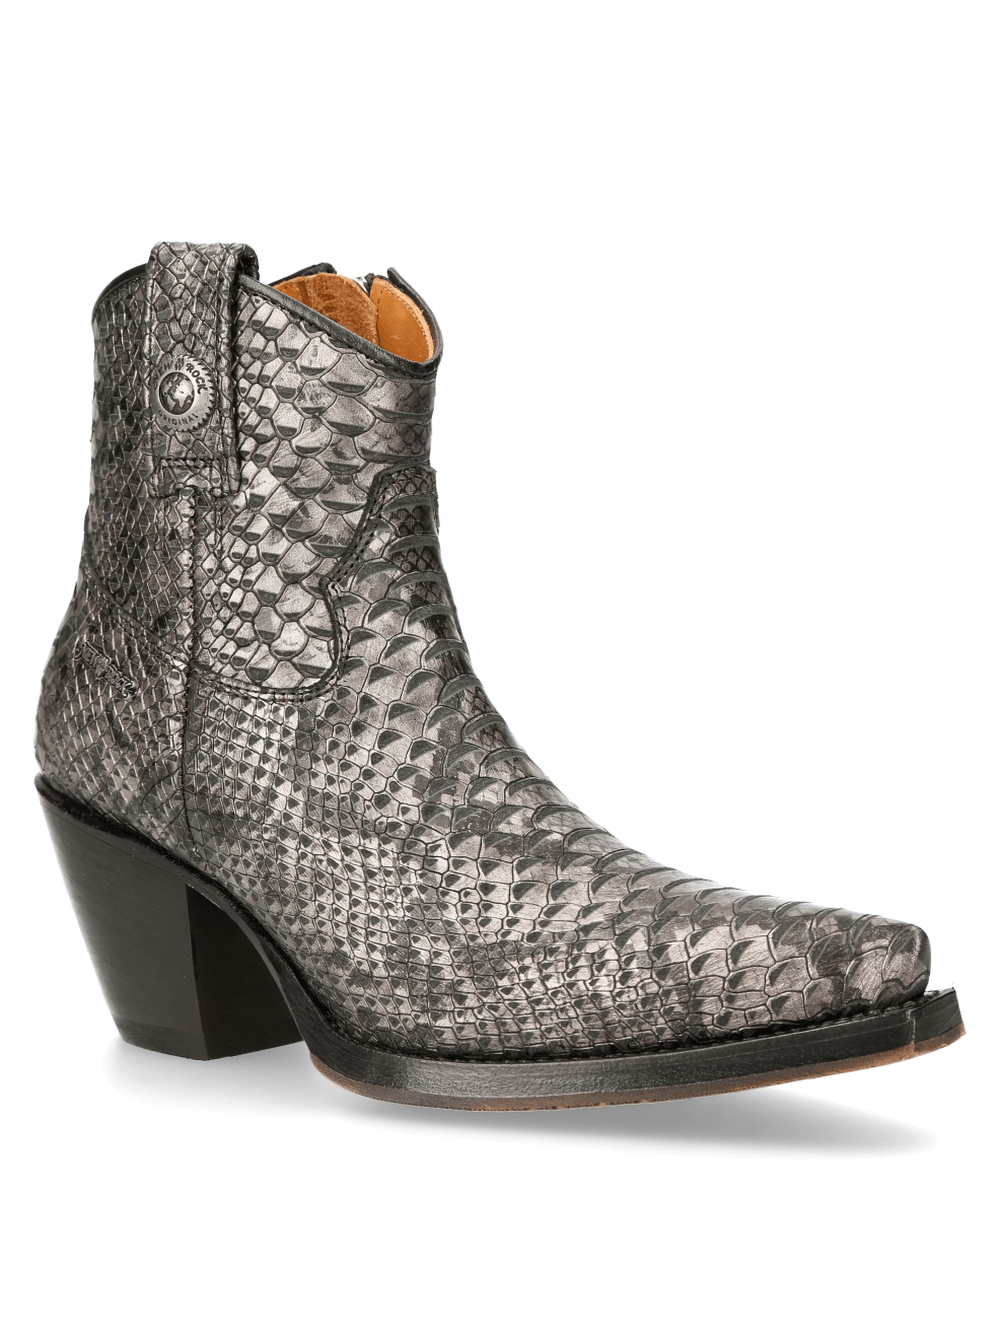 NEW ROCK Steel Snake Print Ankle Boots with Zipper